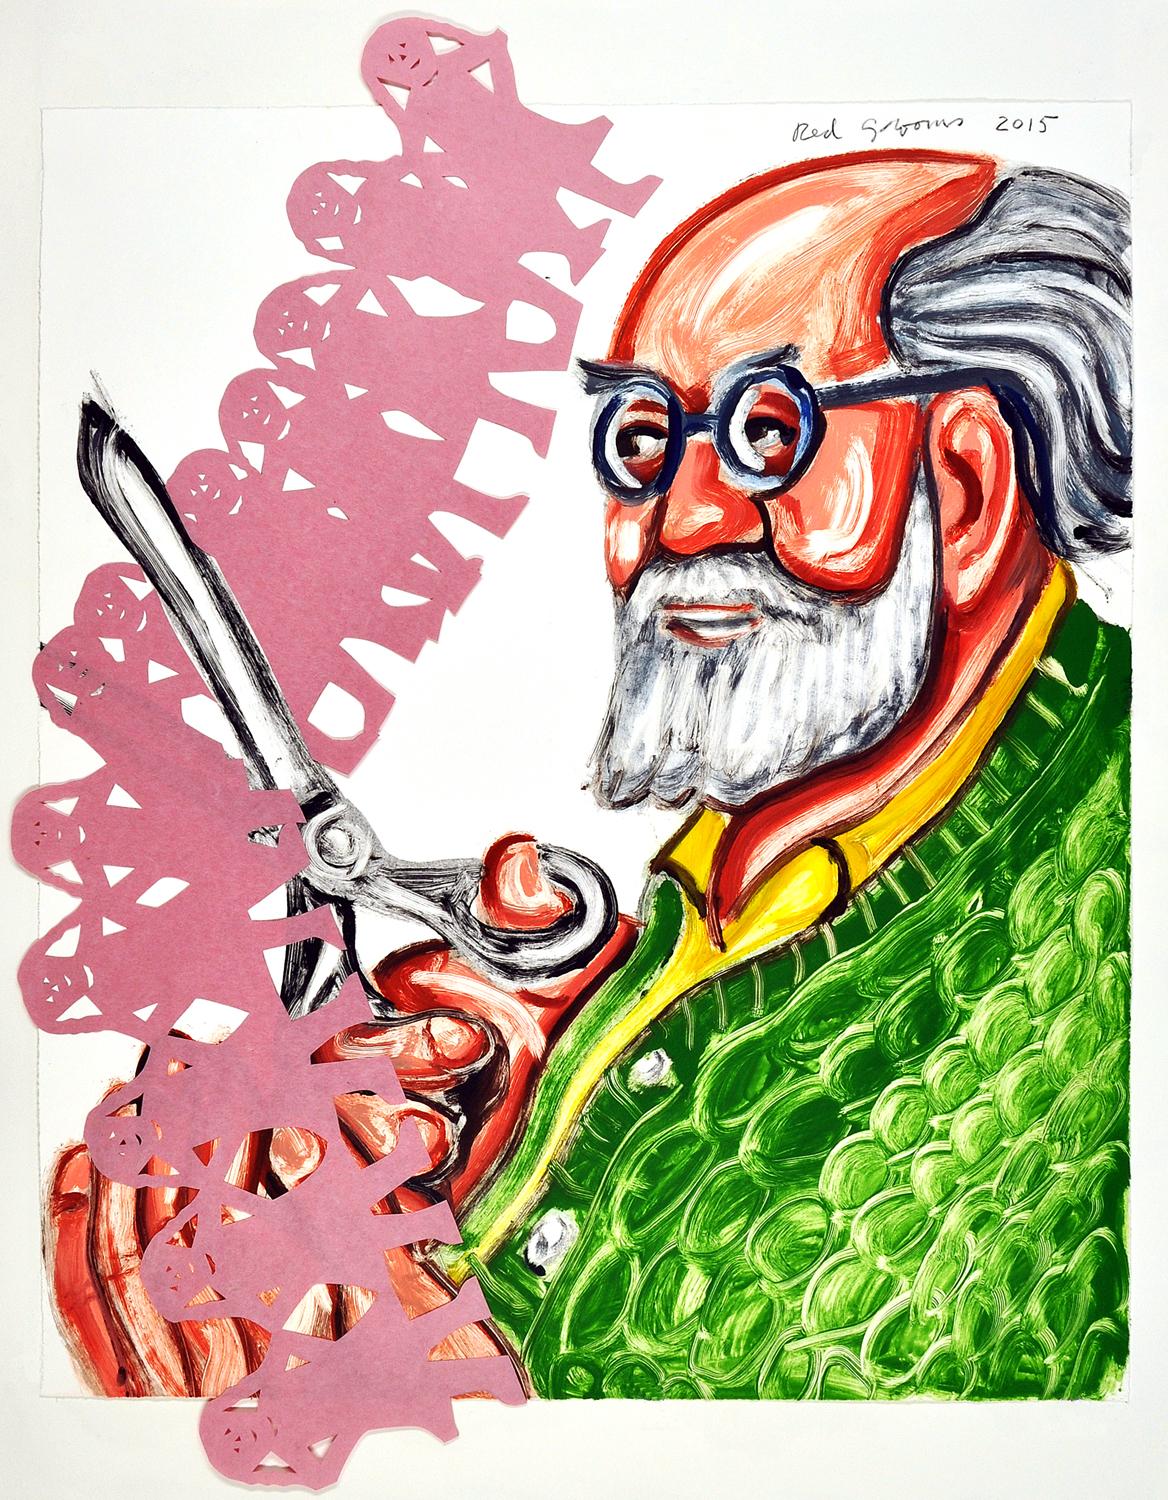 Red Grooms Portrait Print - "Matisse Cut Outs V"